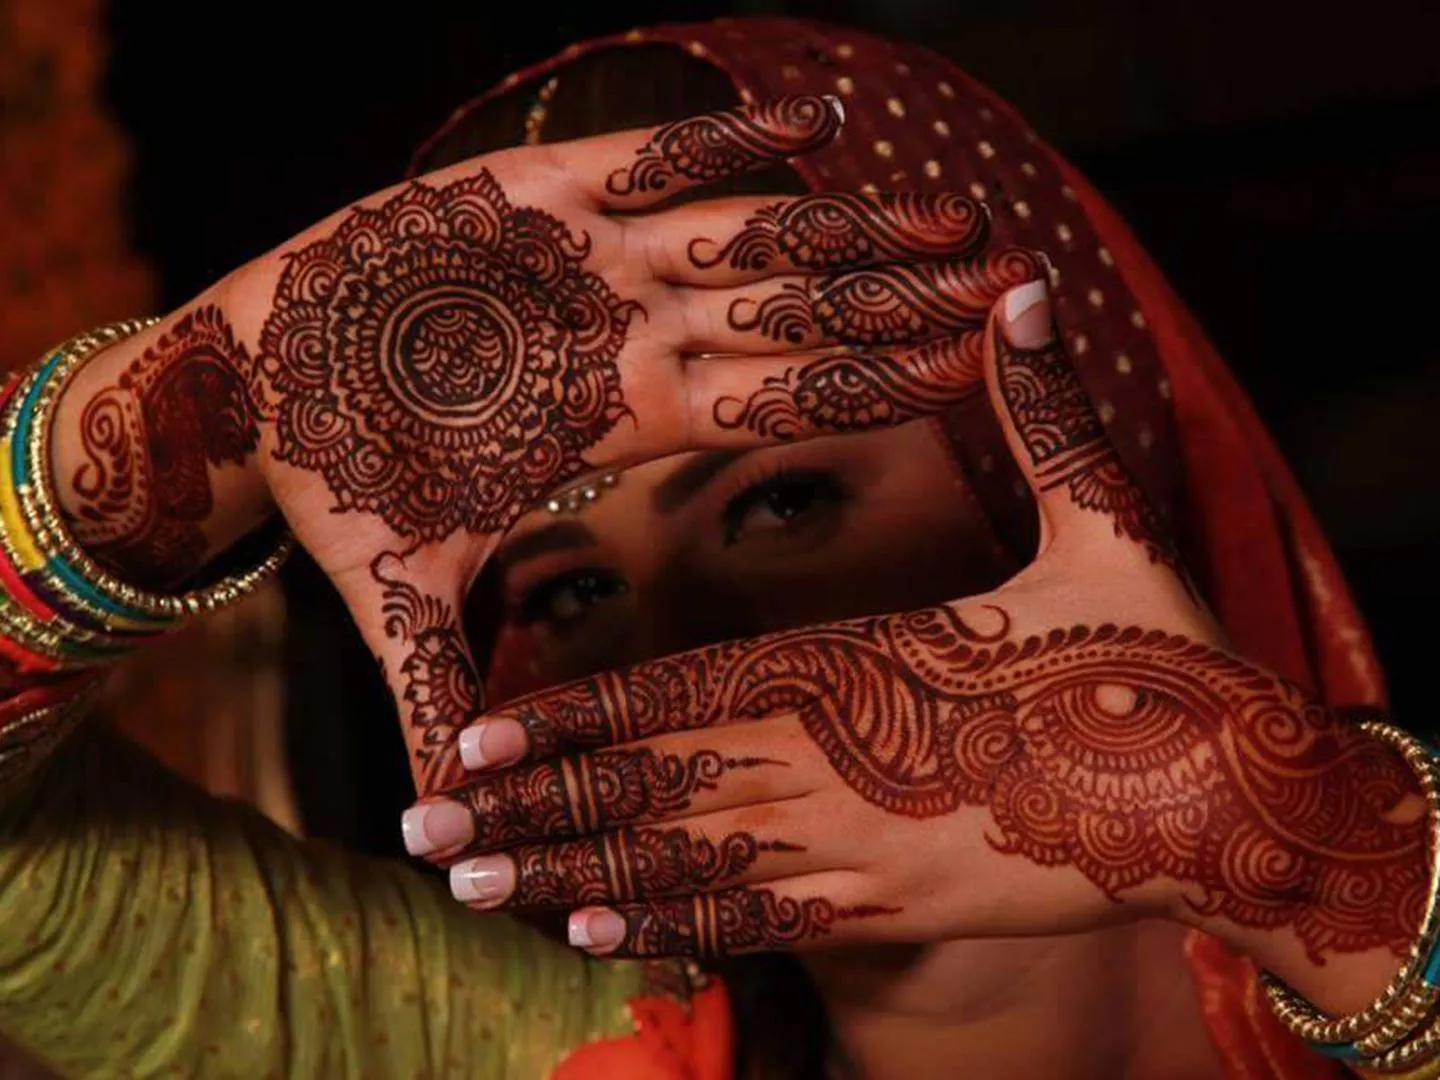 Arranged Marriage: A View from the Inside Out